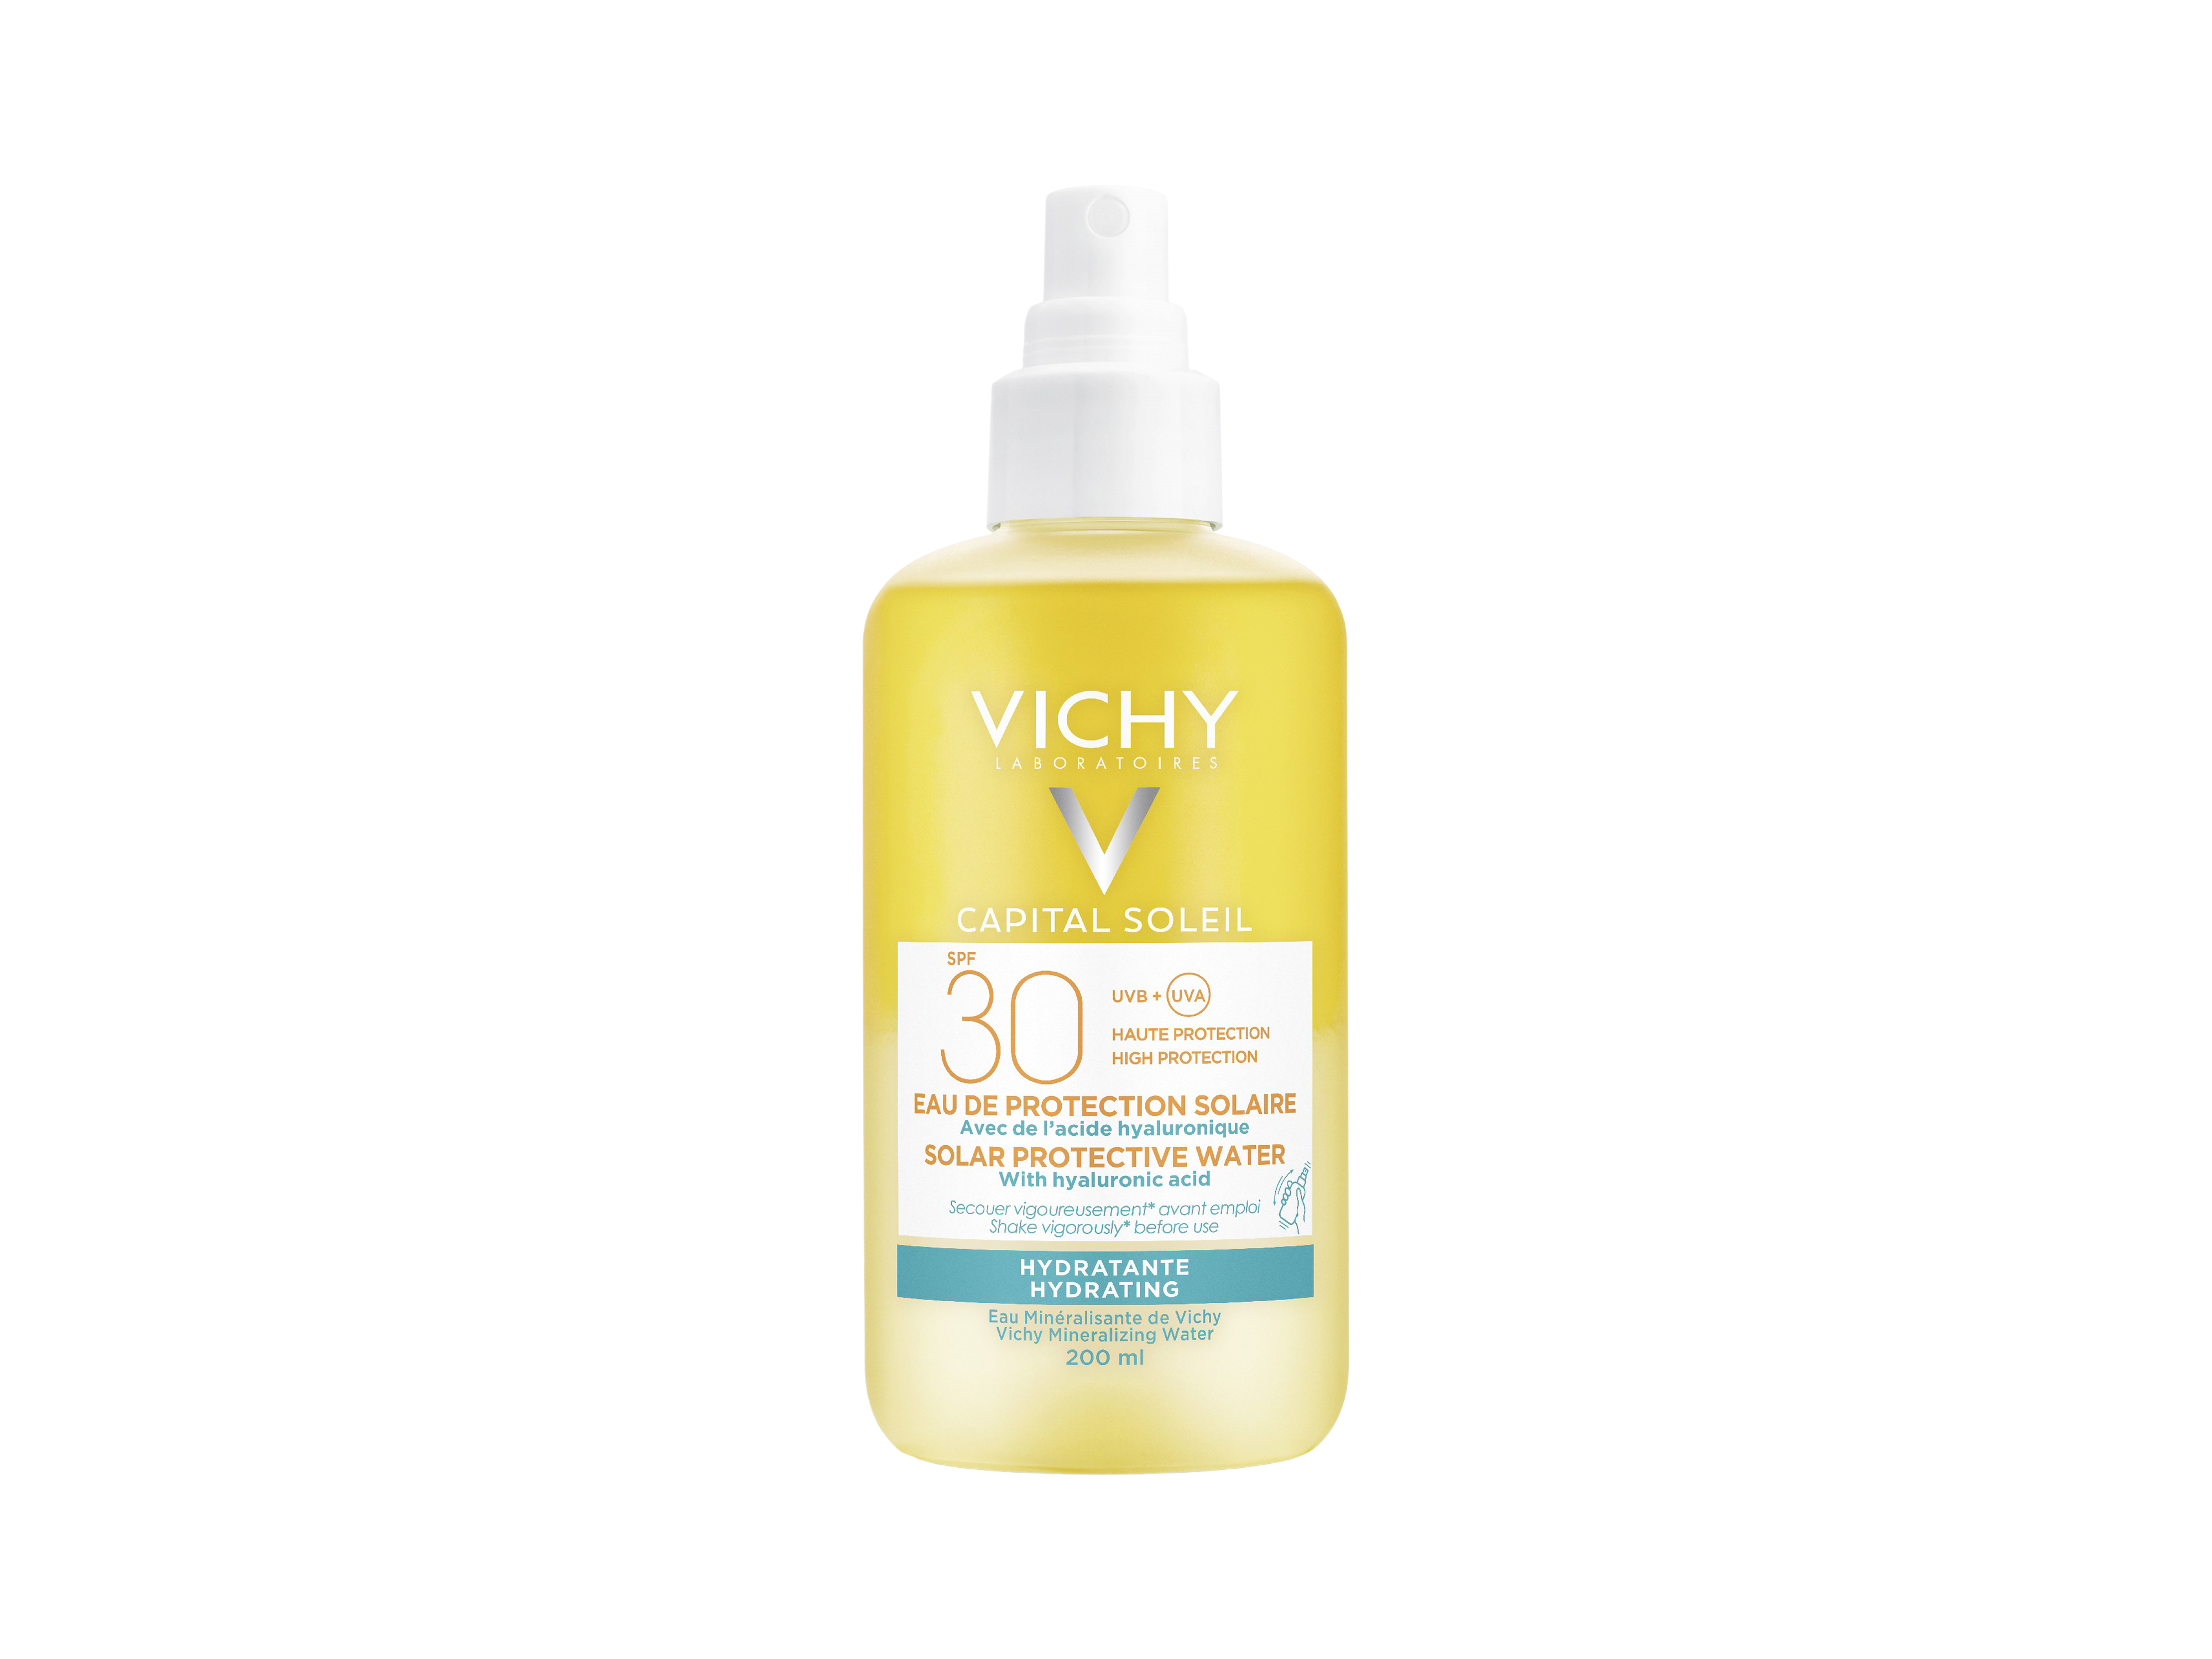 Vichy Capital Soleil Hydra Protective Water, SPF 30, 200 ml